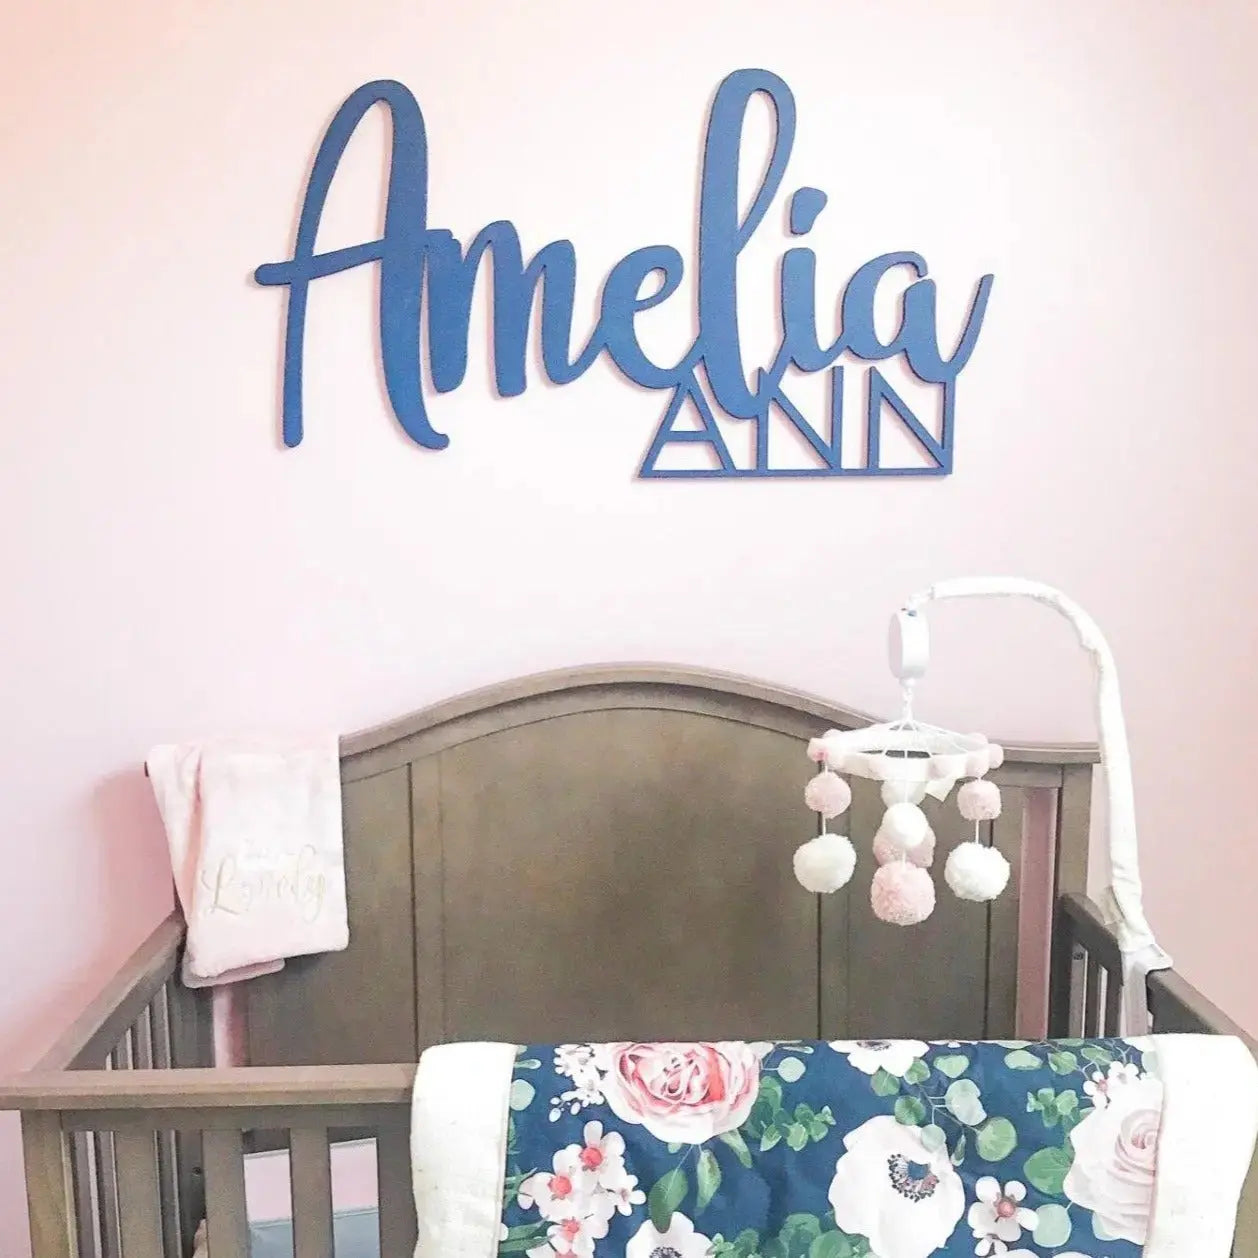 Custom Wooden Nursery Wall Hanging Name Sign, 36 Inches wide - collageandwood